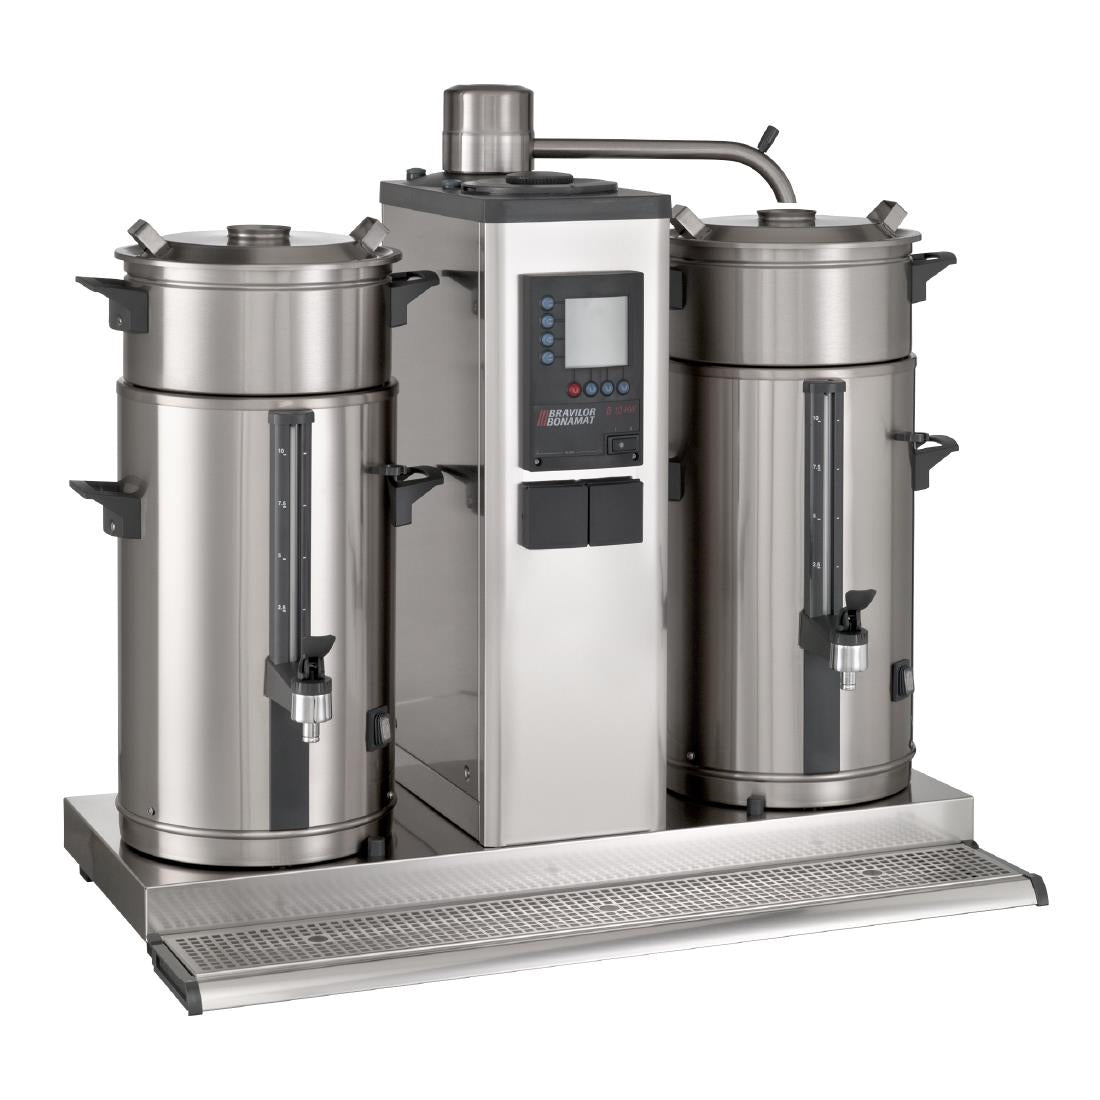 DC678-3P Bravilor B10 Bulk Coffee Brewer with 2x10Ltr Coffee Urns Three Phase JD Catering Equipment Solutions Ltd